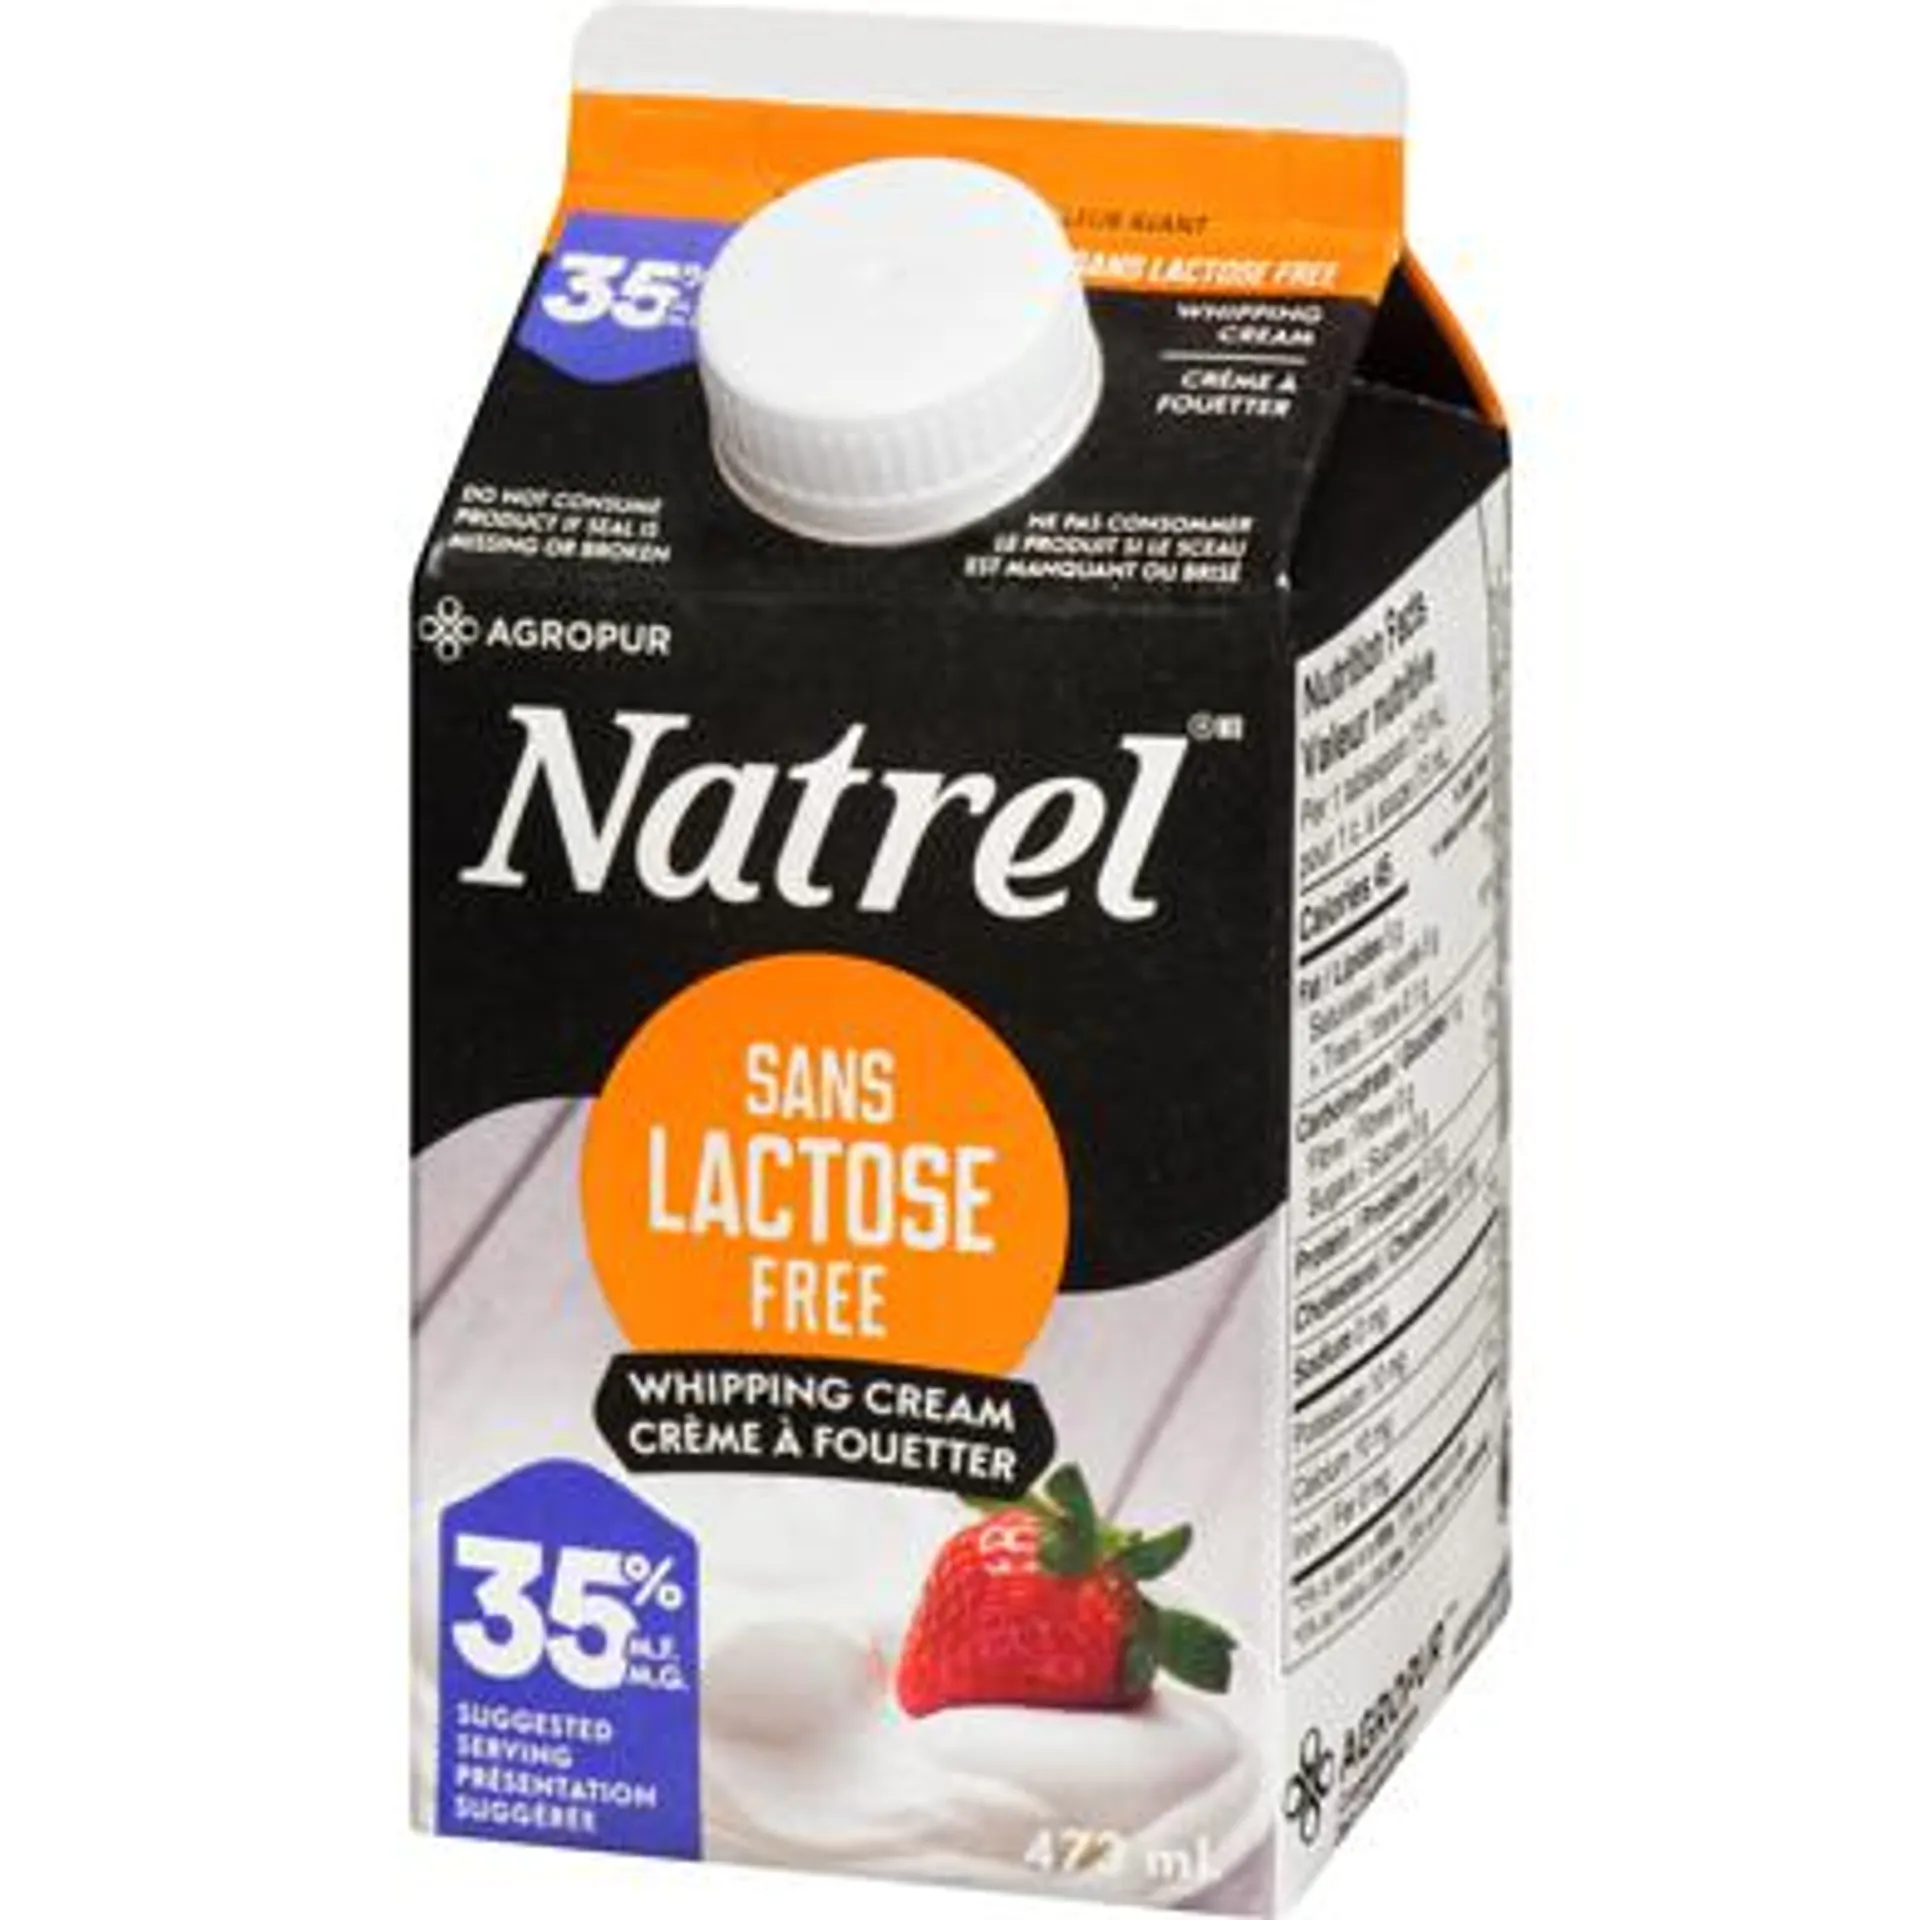 35% Lactose Free Whipping Cream